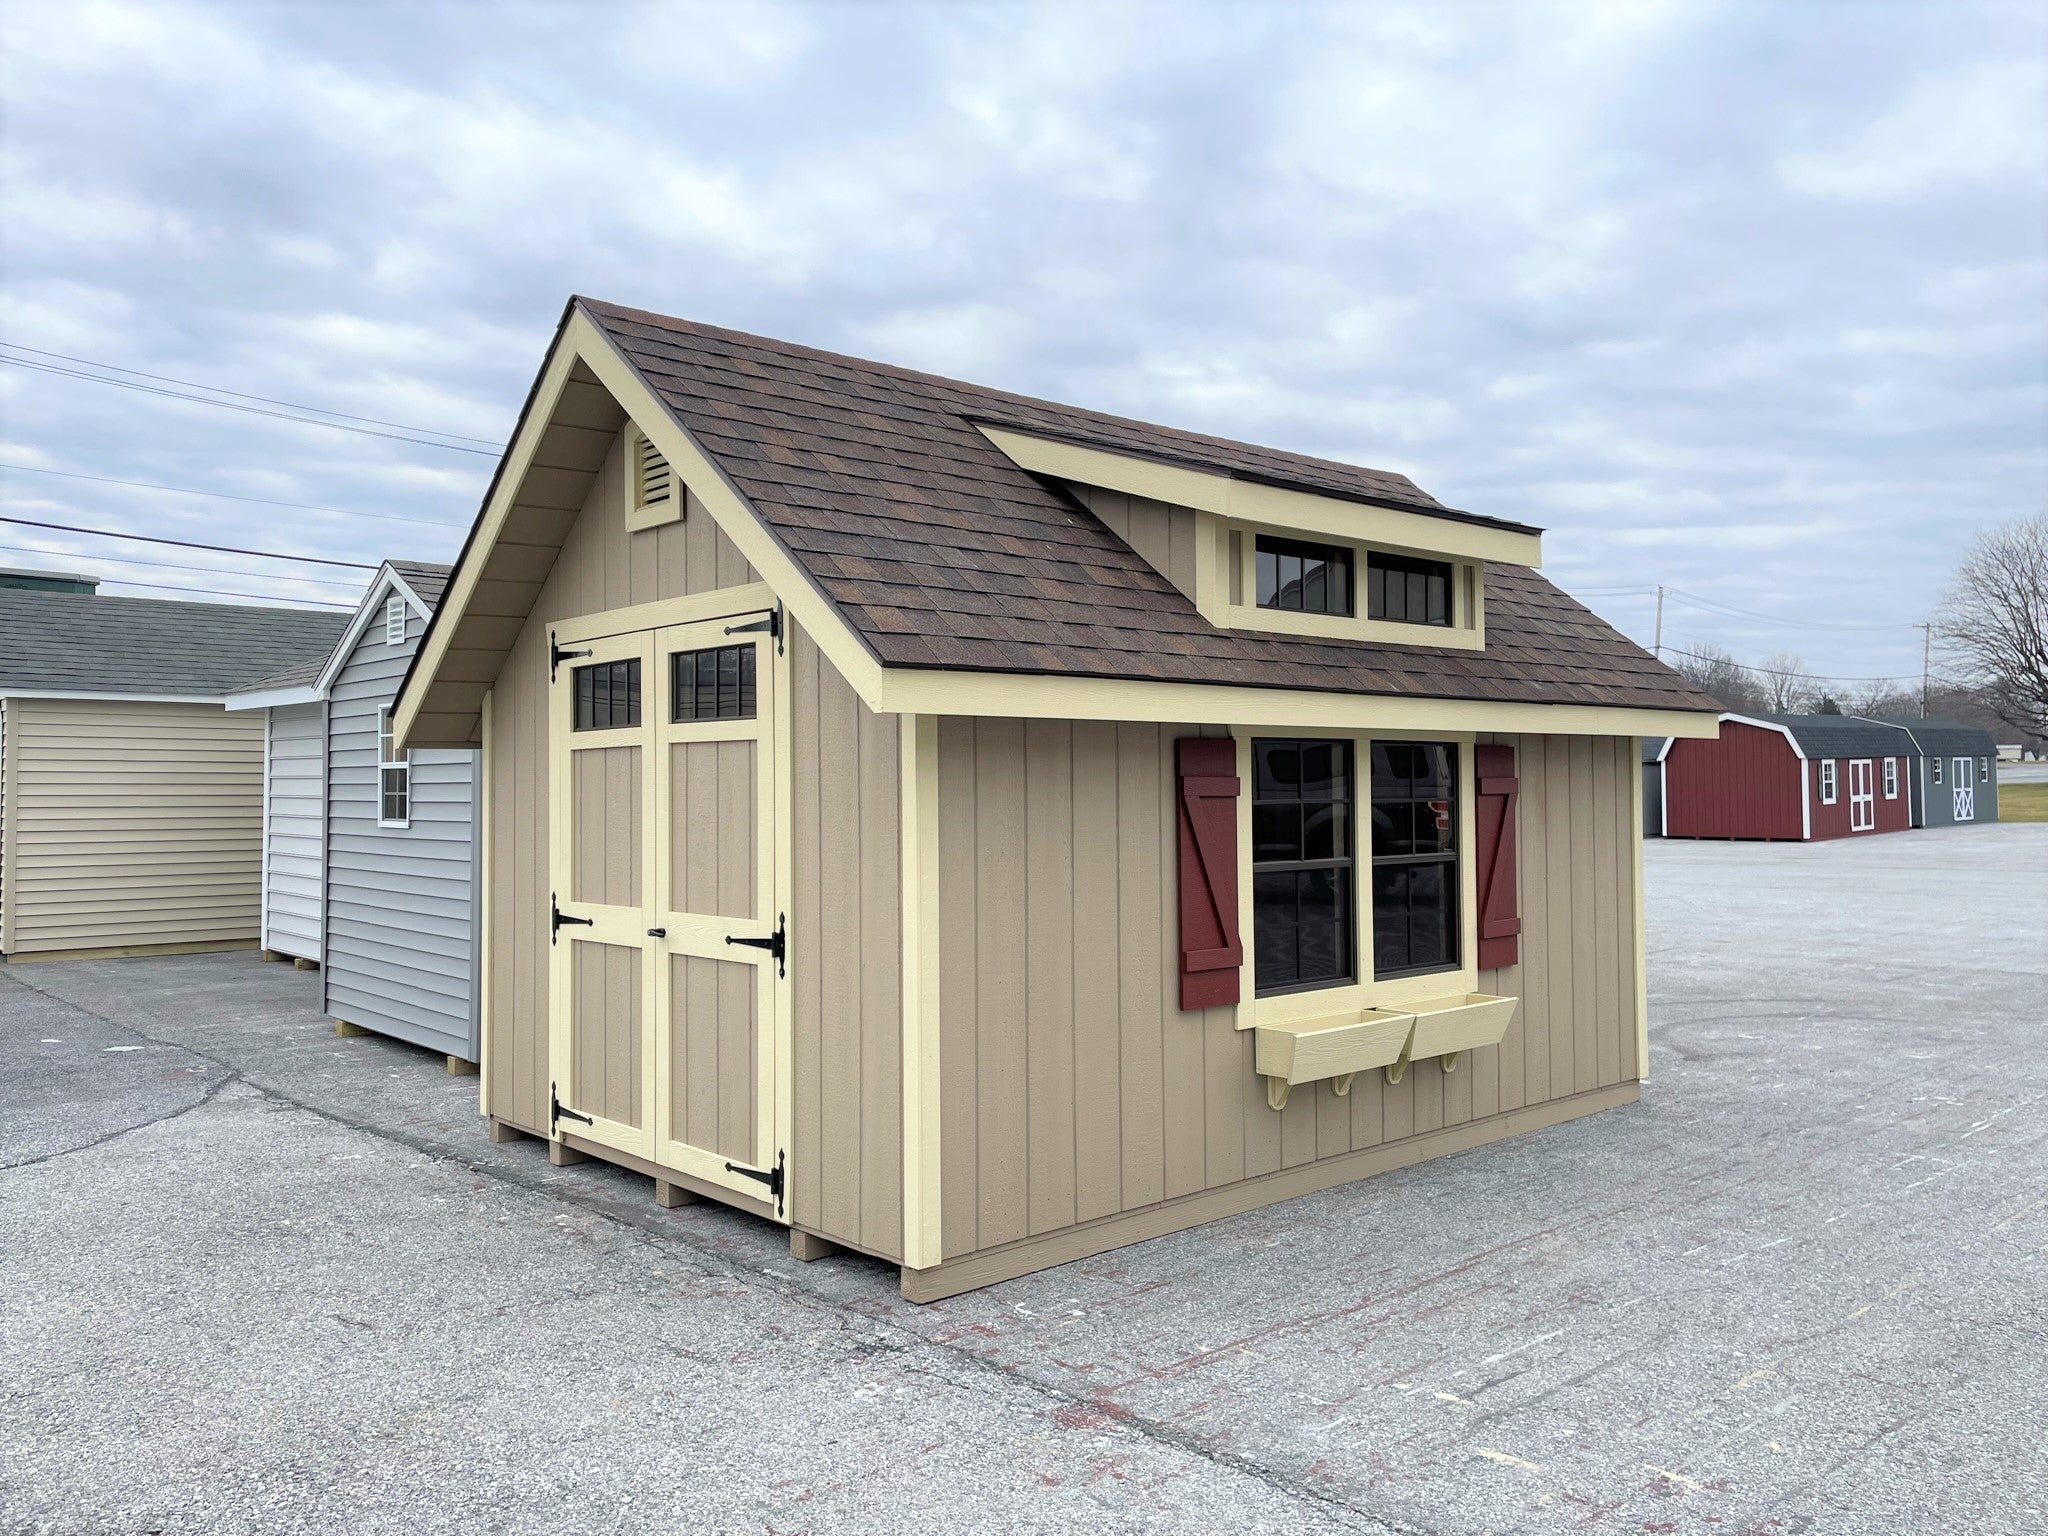 In-Stock Inventory — Barns, Sheds, Animal Structures, Garages & More!